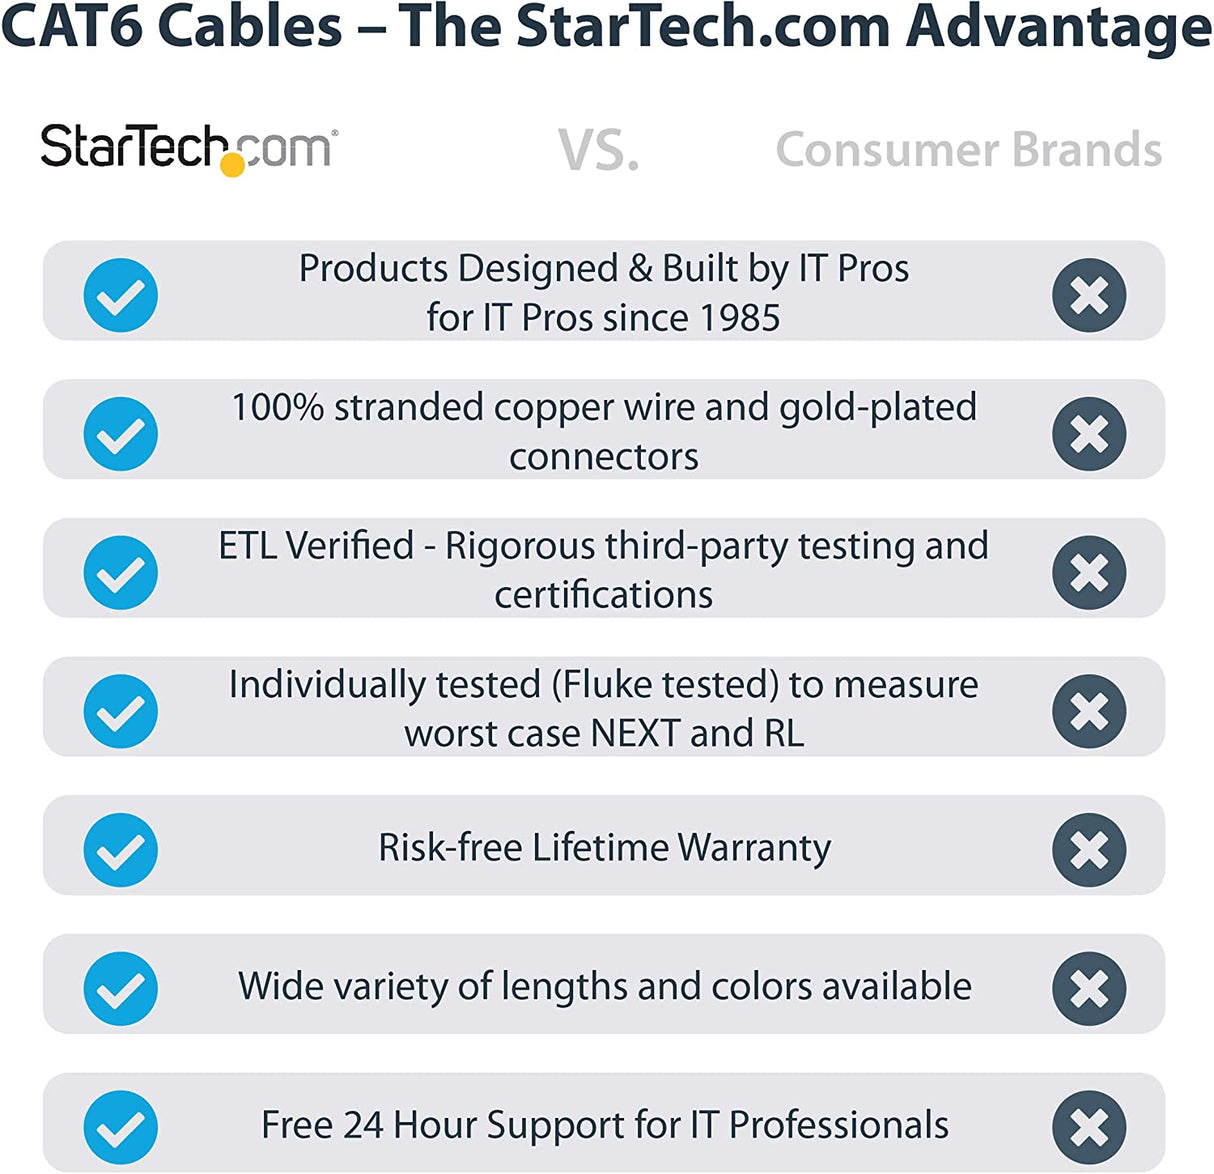 StarTech.com 7ft CAT6 Ethernet Cable - Black CAT 6 Gigabit Ethernet Wire -650MHz 100W PoE++ RJ45 UTP Molded Category 6 Network/Patch Cord w/Strain Relief/Fluke Tested UL/TIA Certified (C6PATCH7BK) Black 7 ft / 2.1 m 1 Pack